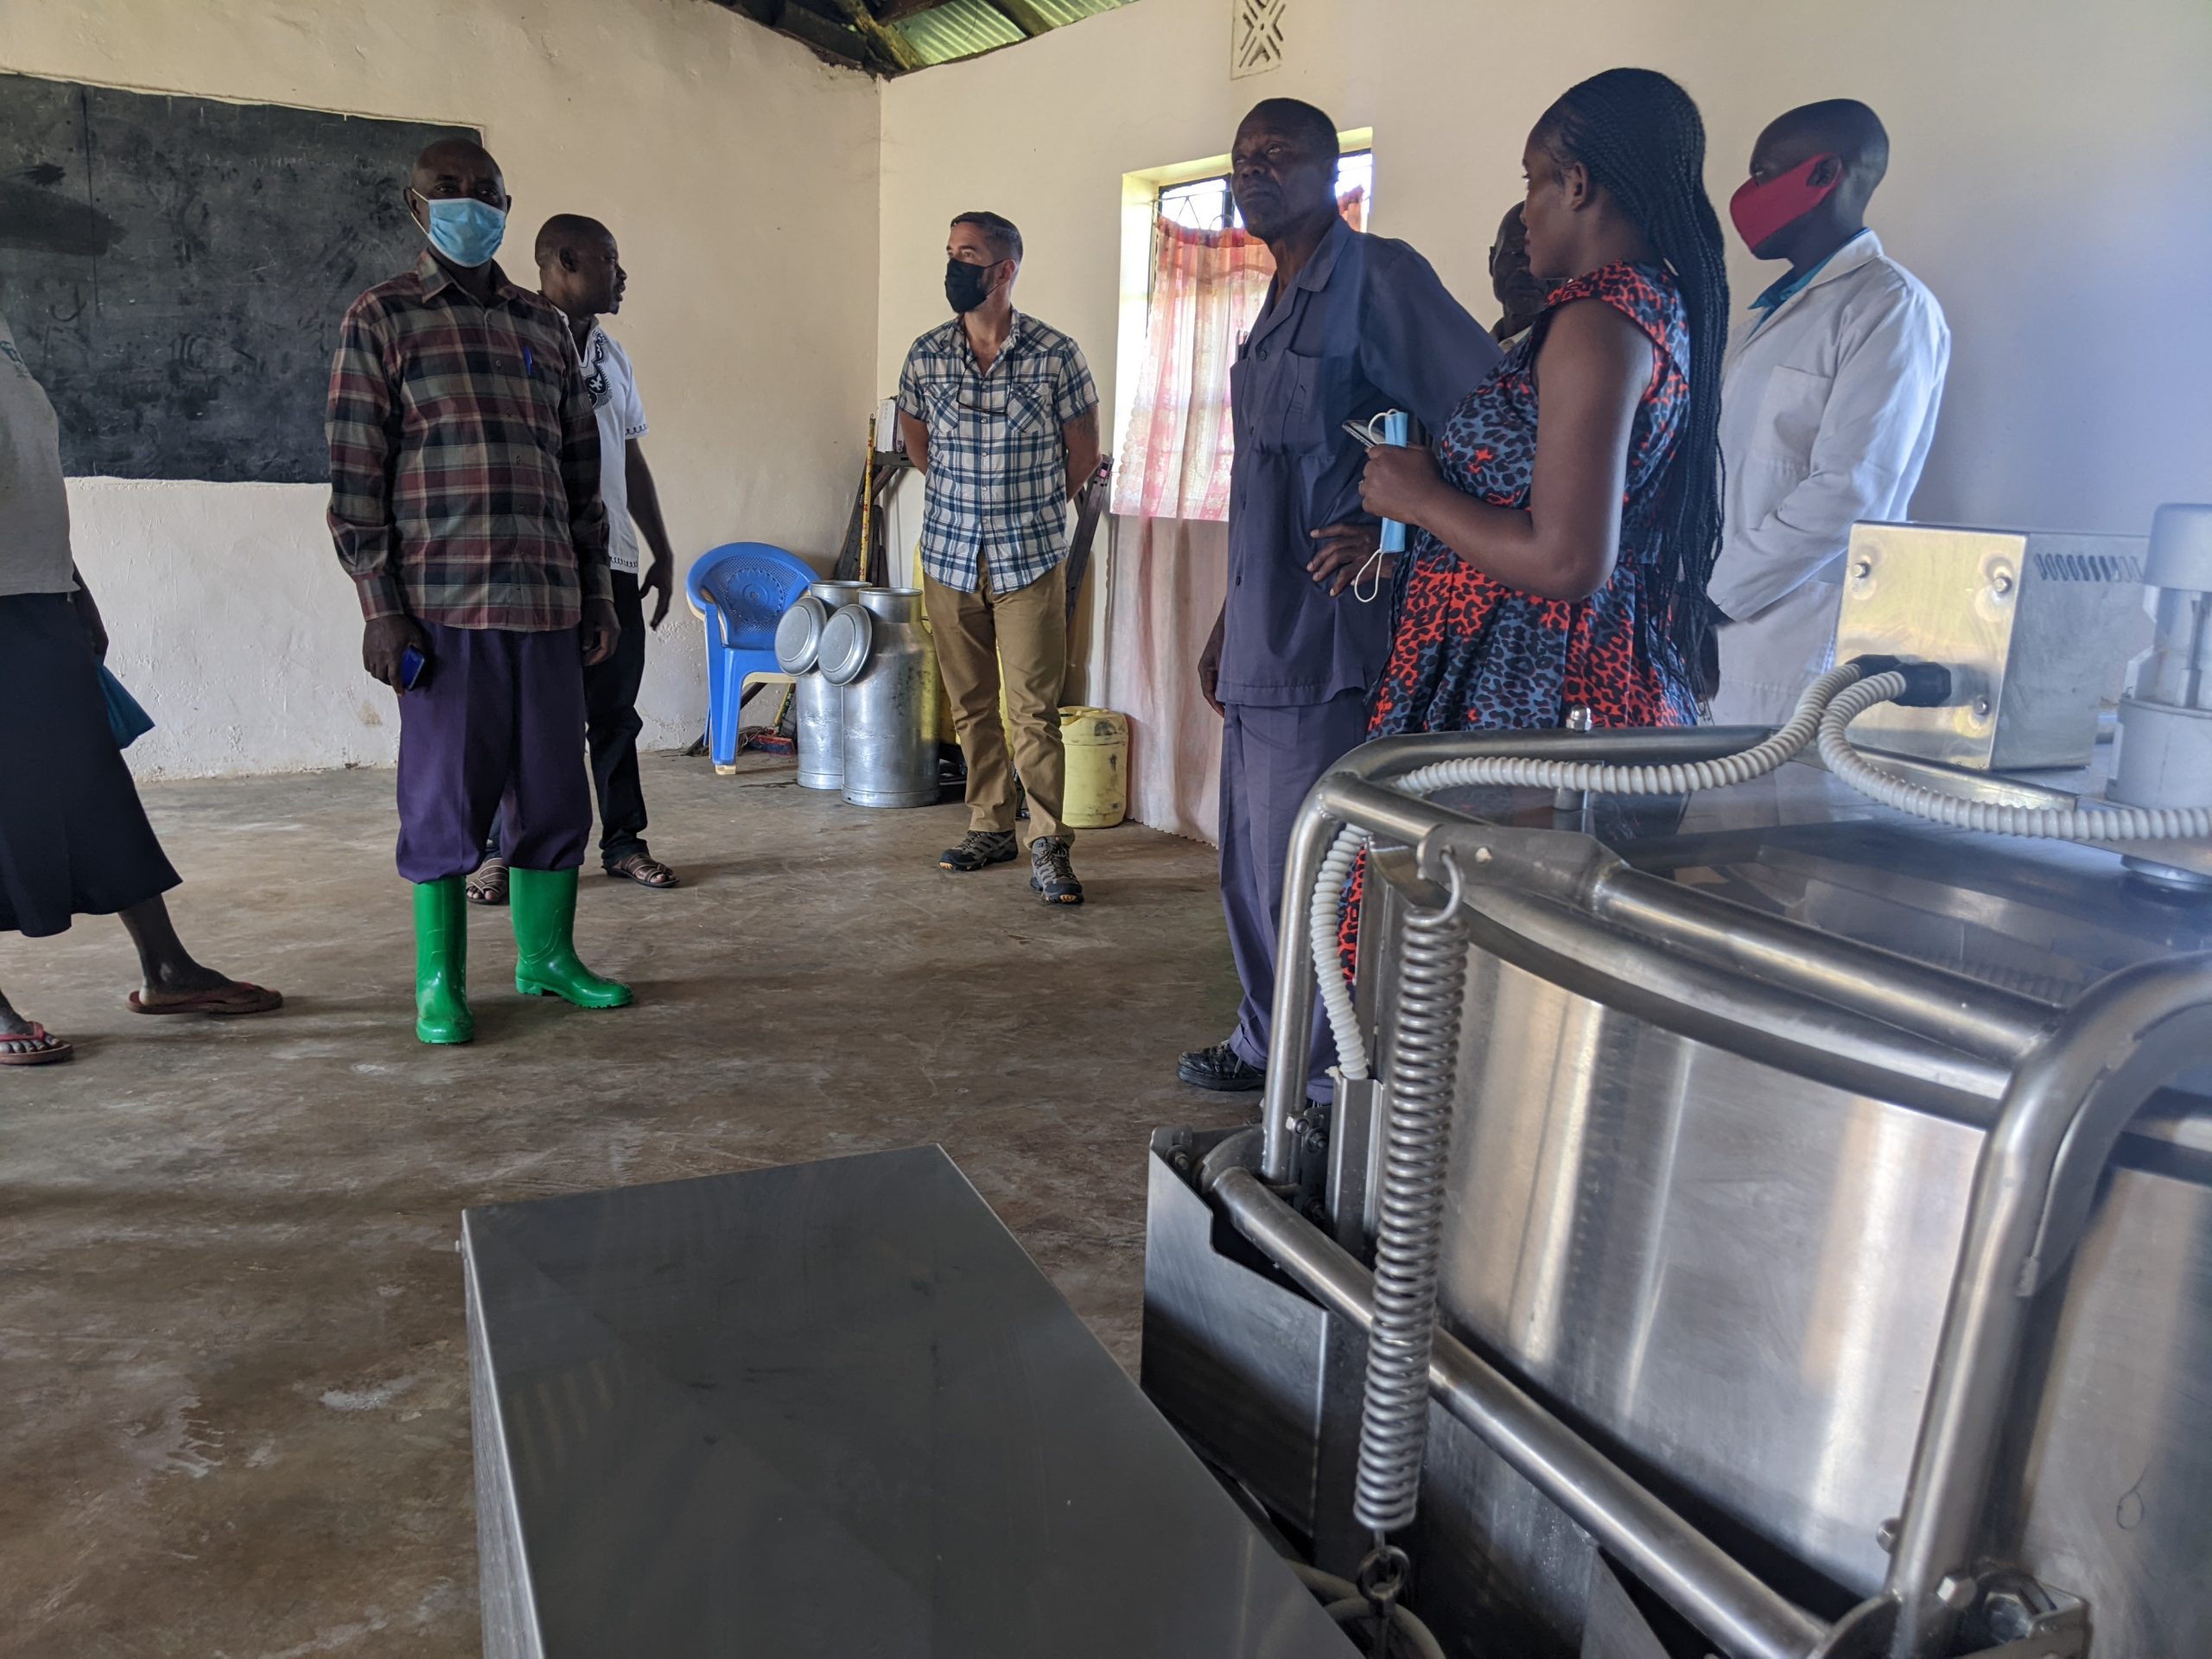 group of people in a milk cooler facility that is supporting farmer resilience to shocks, including climate-related shocks